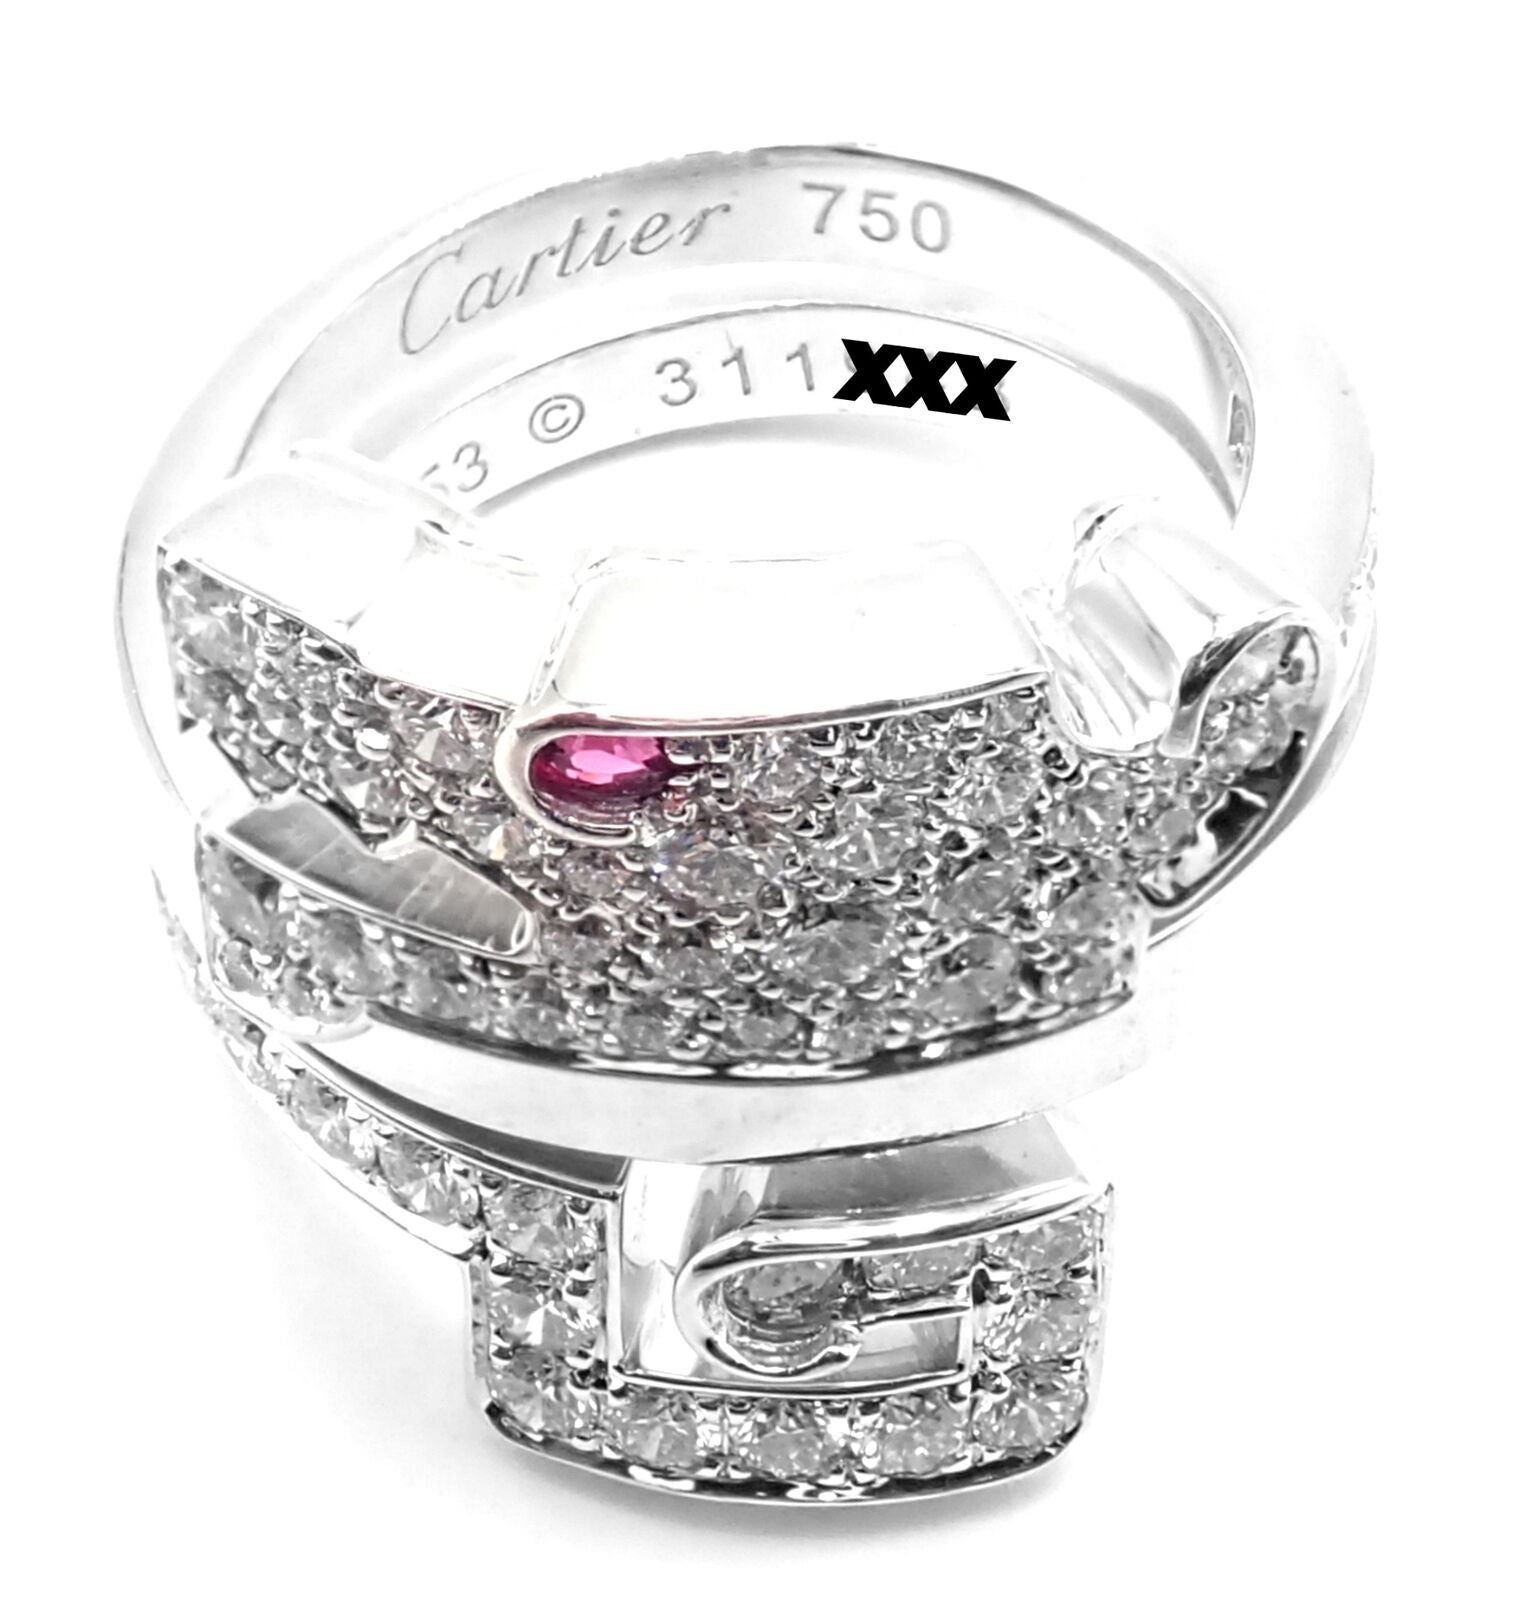 Cartier Jewelry & Watches:Fine Jewelry:Rings Authentic! Cartier Le Baiser Du Dragon 18k White Gold Diamond Ruby Ring Size 53